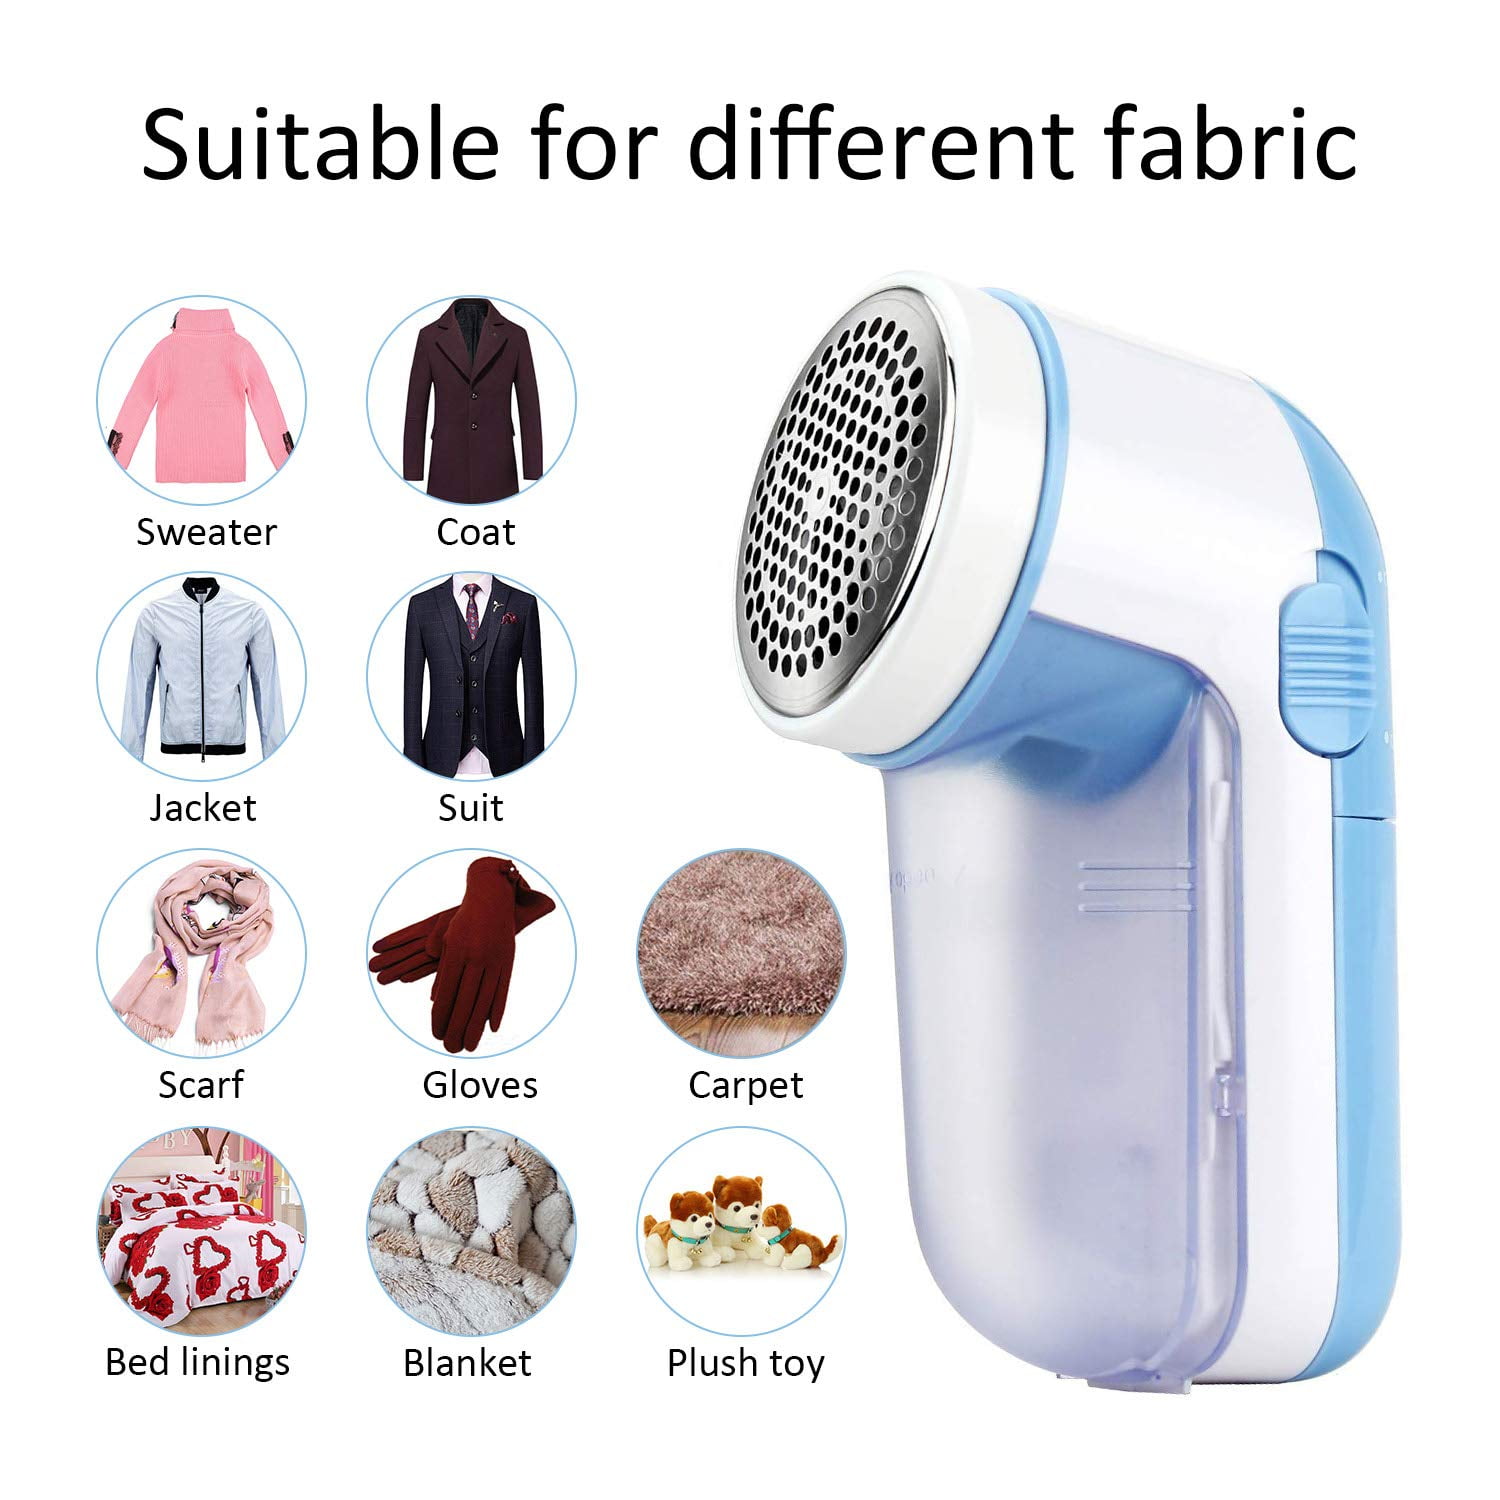 Philips Fabric Shaver, Lint Remover For Woolen Sweaters, Blankets